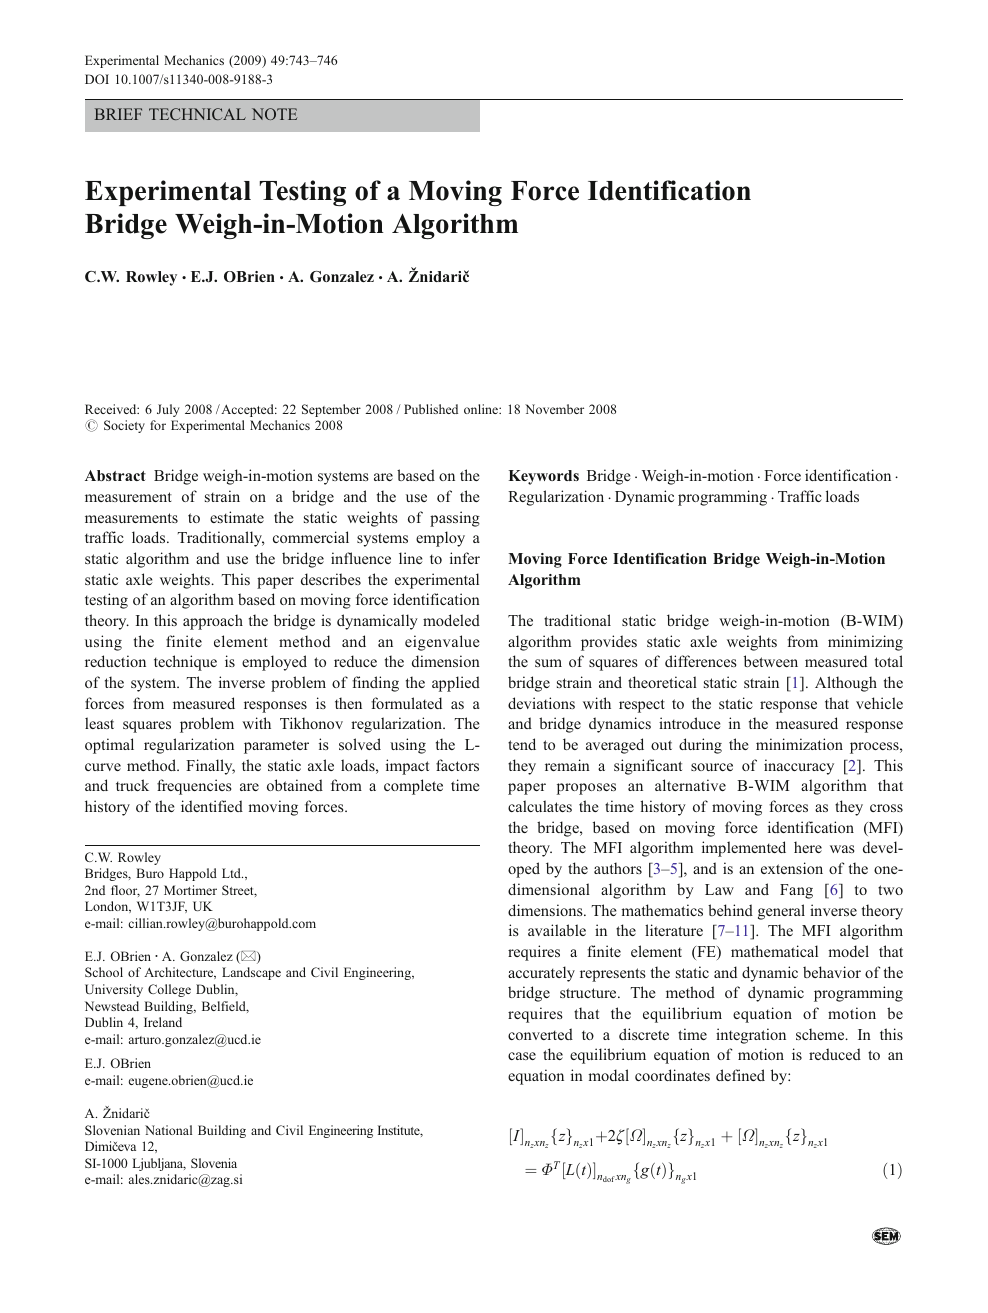 Experimental Testing Of A Moving Force Identification Bridge Weigh In Motion Algorithm Topic Of Research Paper In Civil Engineering Download Scholarly Article Pdf And Read For Free On Cyberleninka Open Science Hub